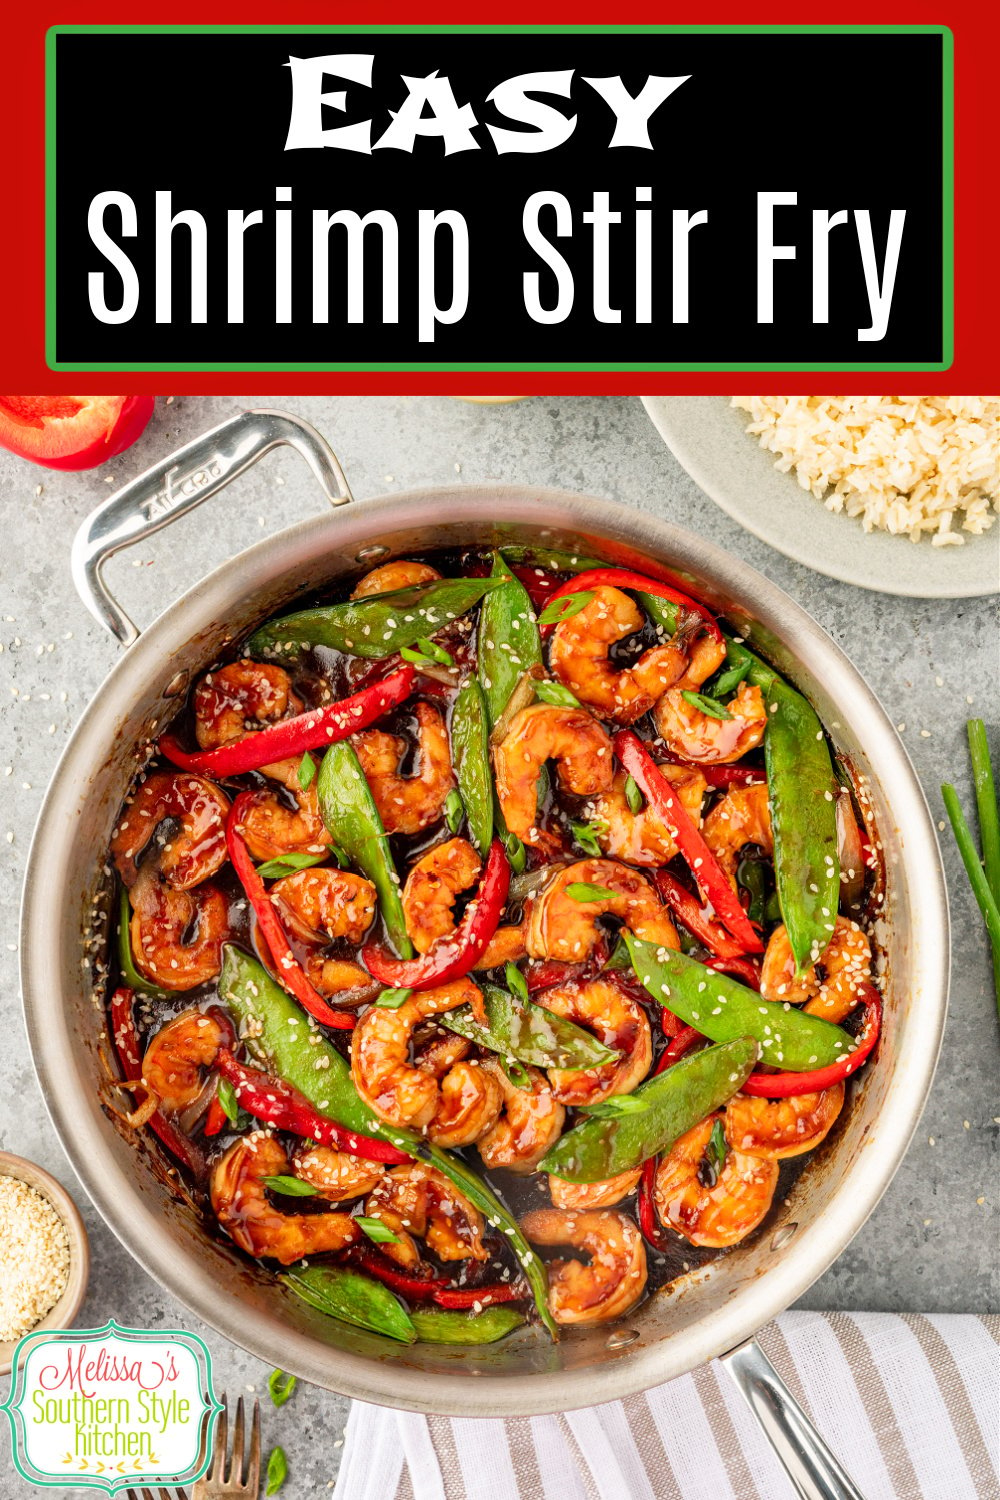 This Asian inspired Shrimp Stir Fry recipe features vibrant colors, fresh vegetables and a sweet and tangy homemade teriyaki sauce. #stirfryrecipe @shrimprecipes #shrimpstirfry #easyshrimprecipes #seafood #Asianfood #teriyakishrimp #teriyakisauce via @melissasssk